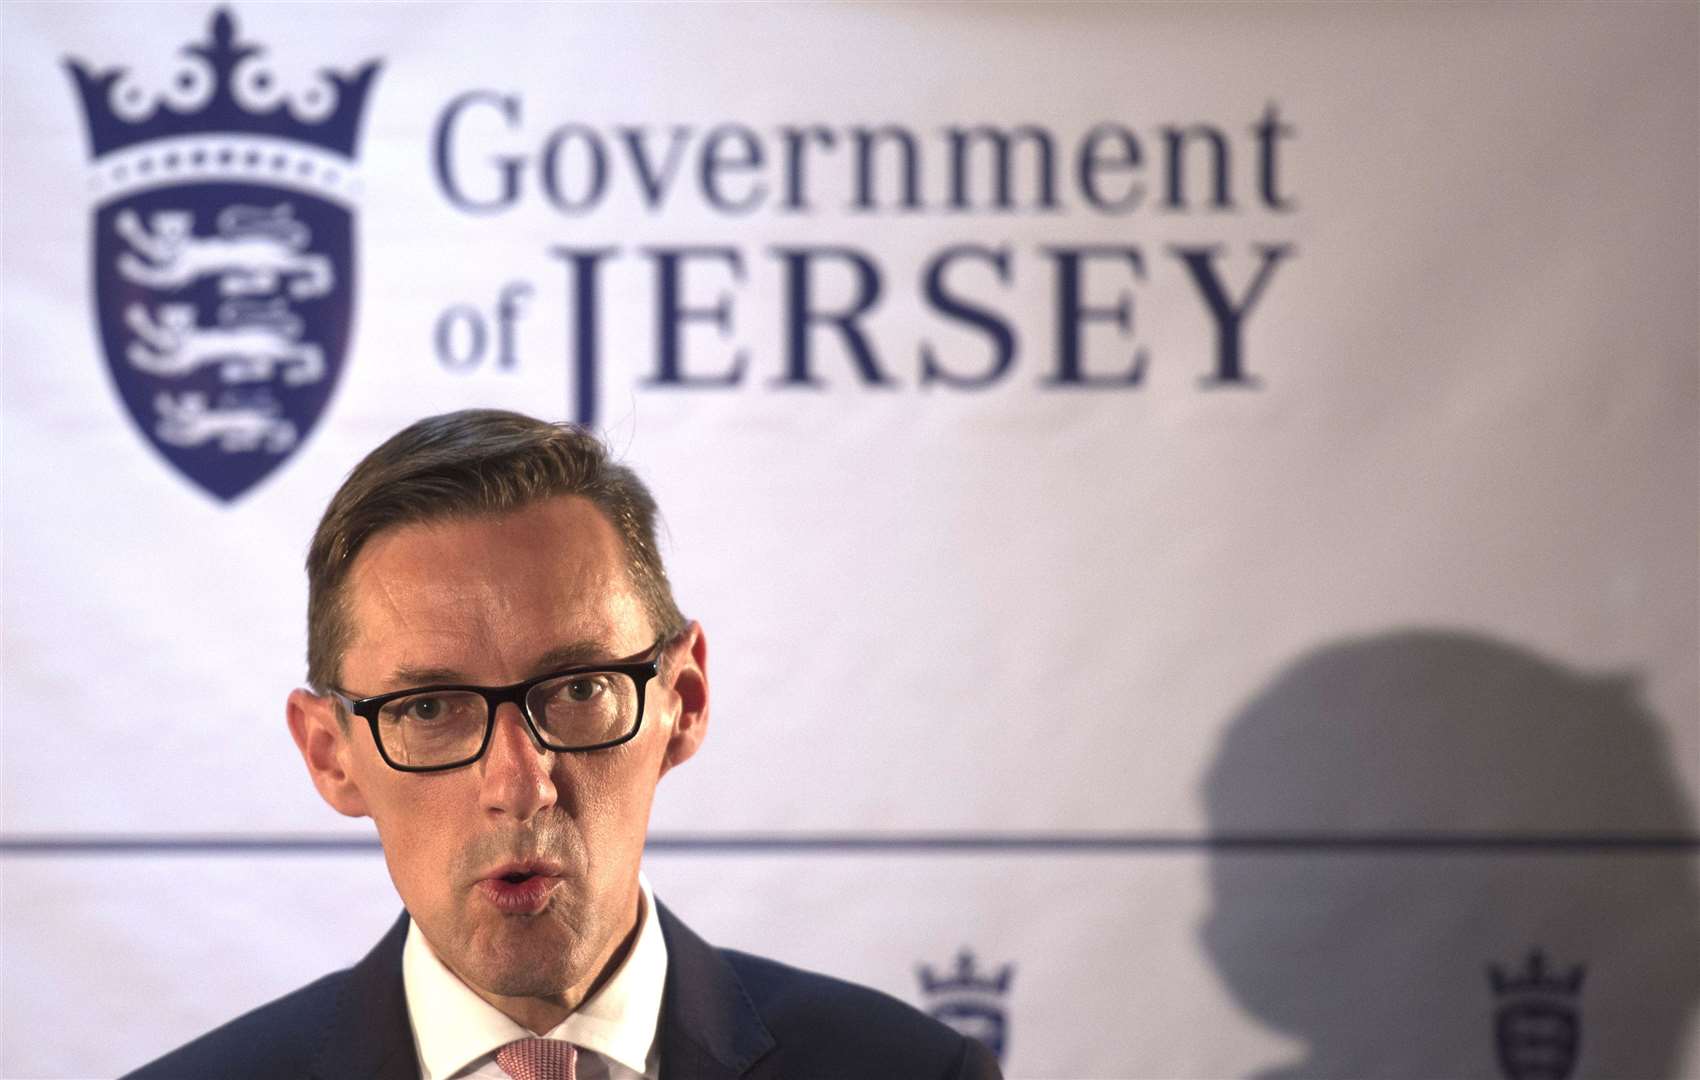 External Relations Minister Ian Gorst has said Jersey wants a diplomatic solution (Lauren Hurley/PA)